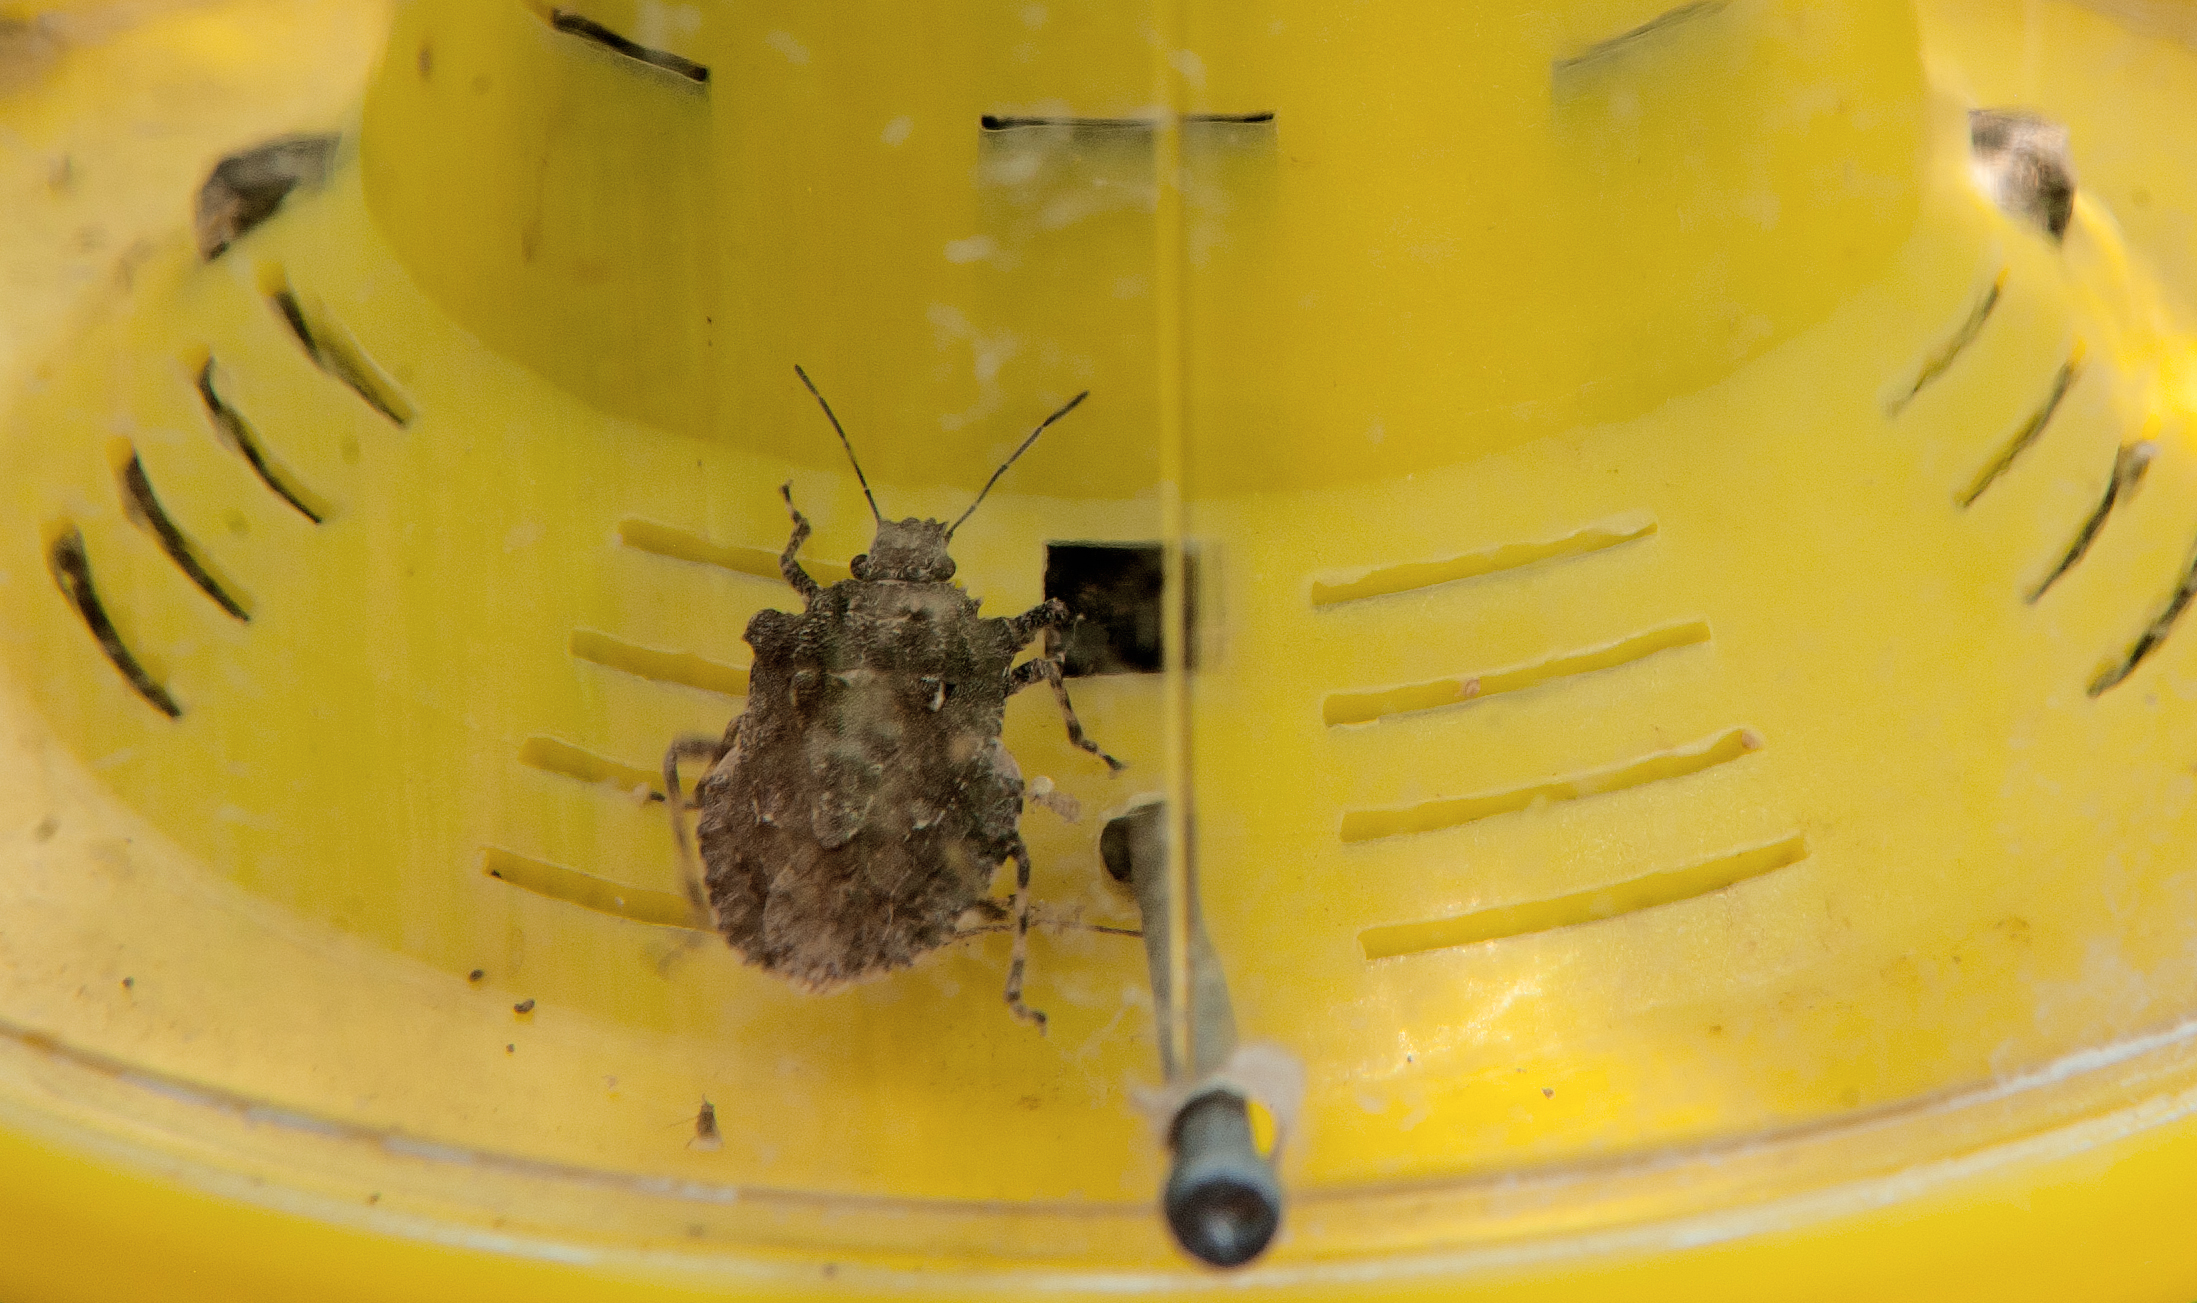 More Stink Bugs Will Invade the U.S. Amid Climate Change, Study Shows - Newsweek